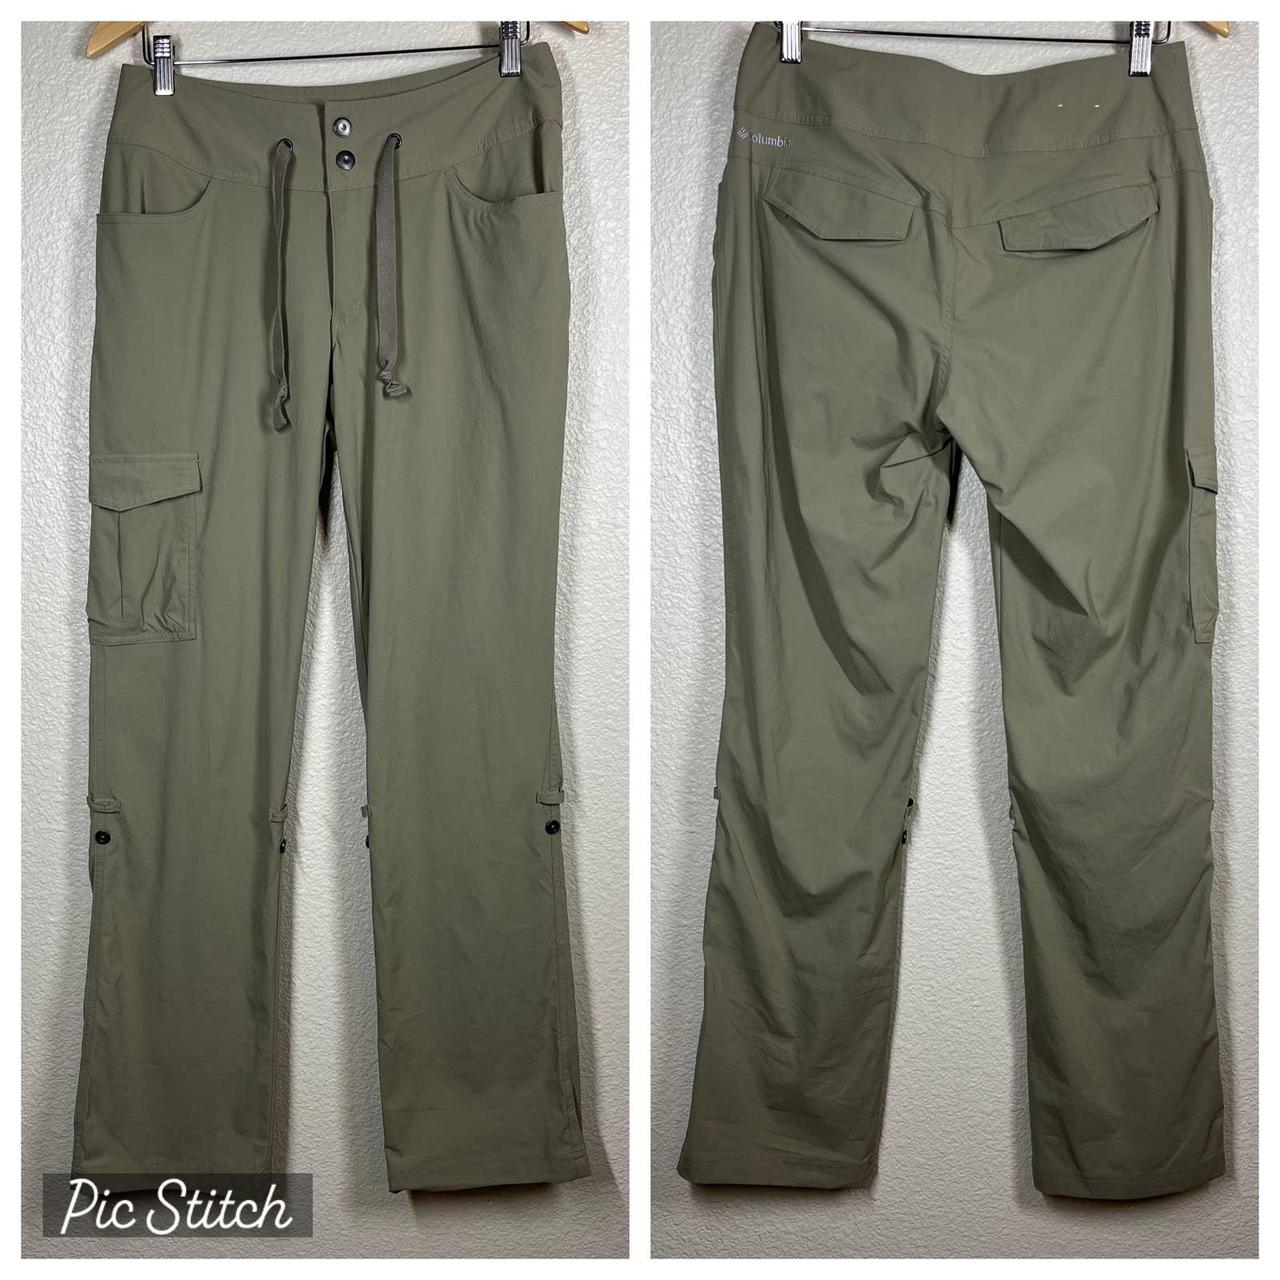 COLUMBIA SPORTSWEAR® OUTDOOR COLLECTION | Omni-Shield Convertible Pants,  Men's Fashion, Activewear on Carousell